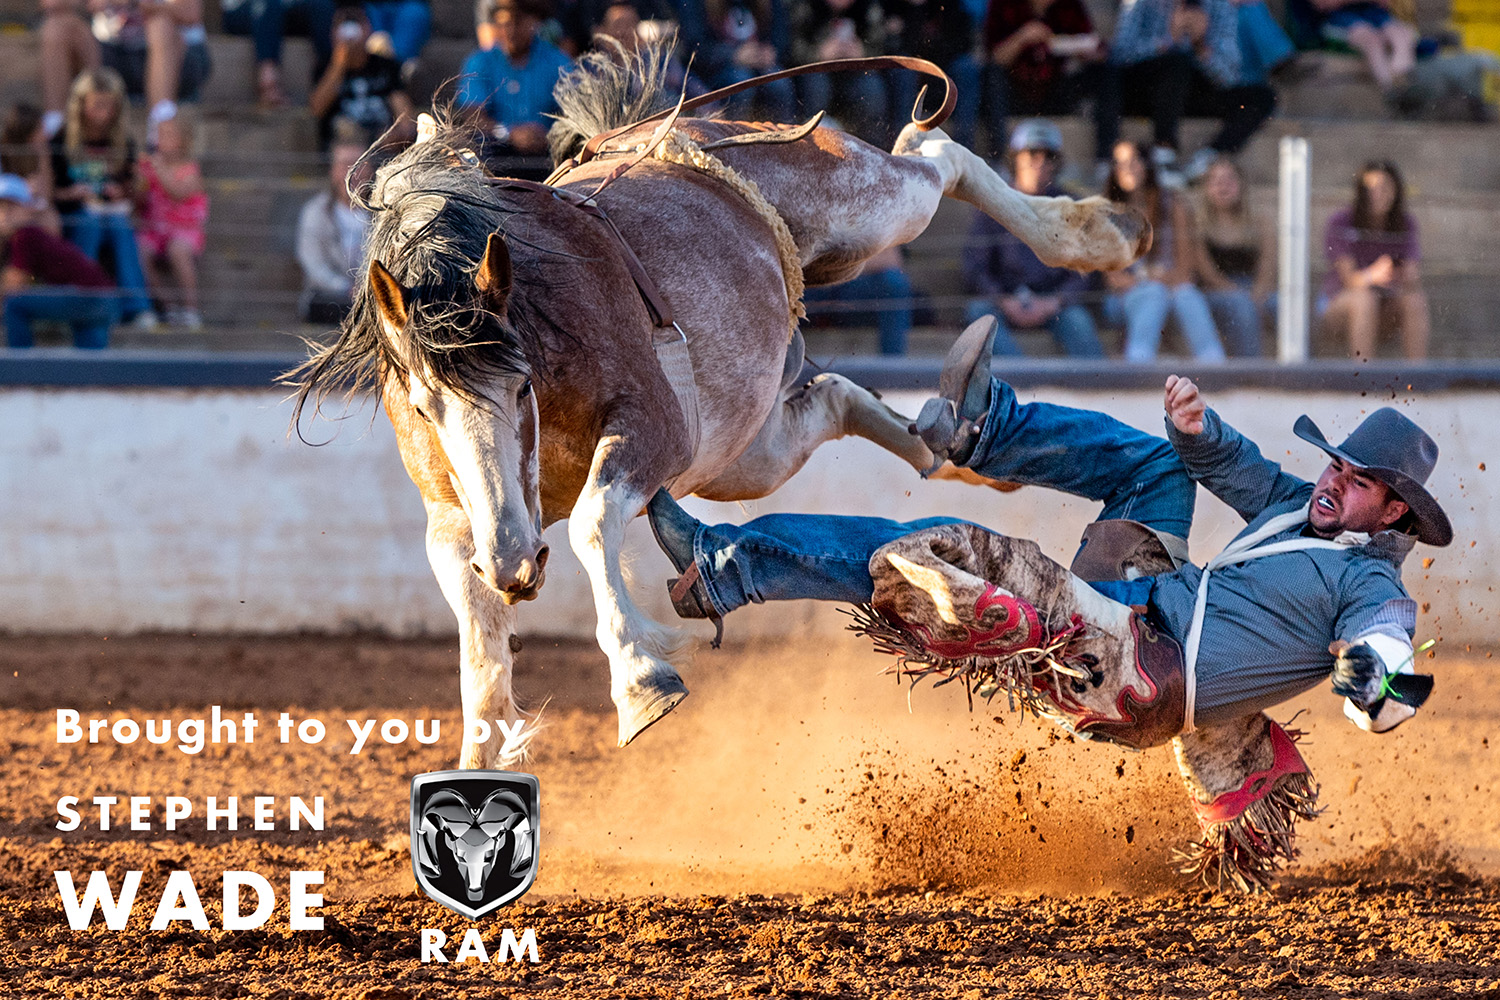 Stephen Wade Teams Up for Hometown Fun in Southern Utah: Rodeos, Music, and Community Support